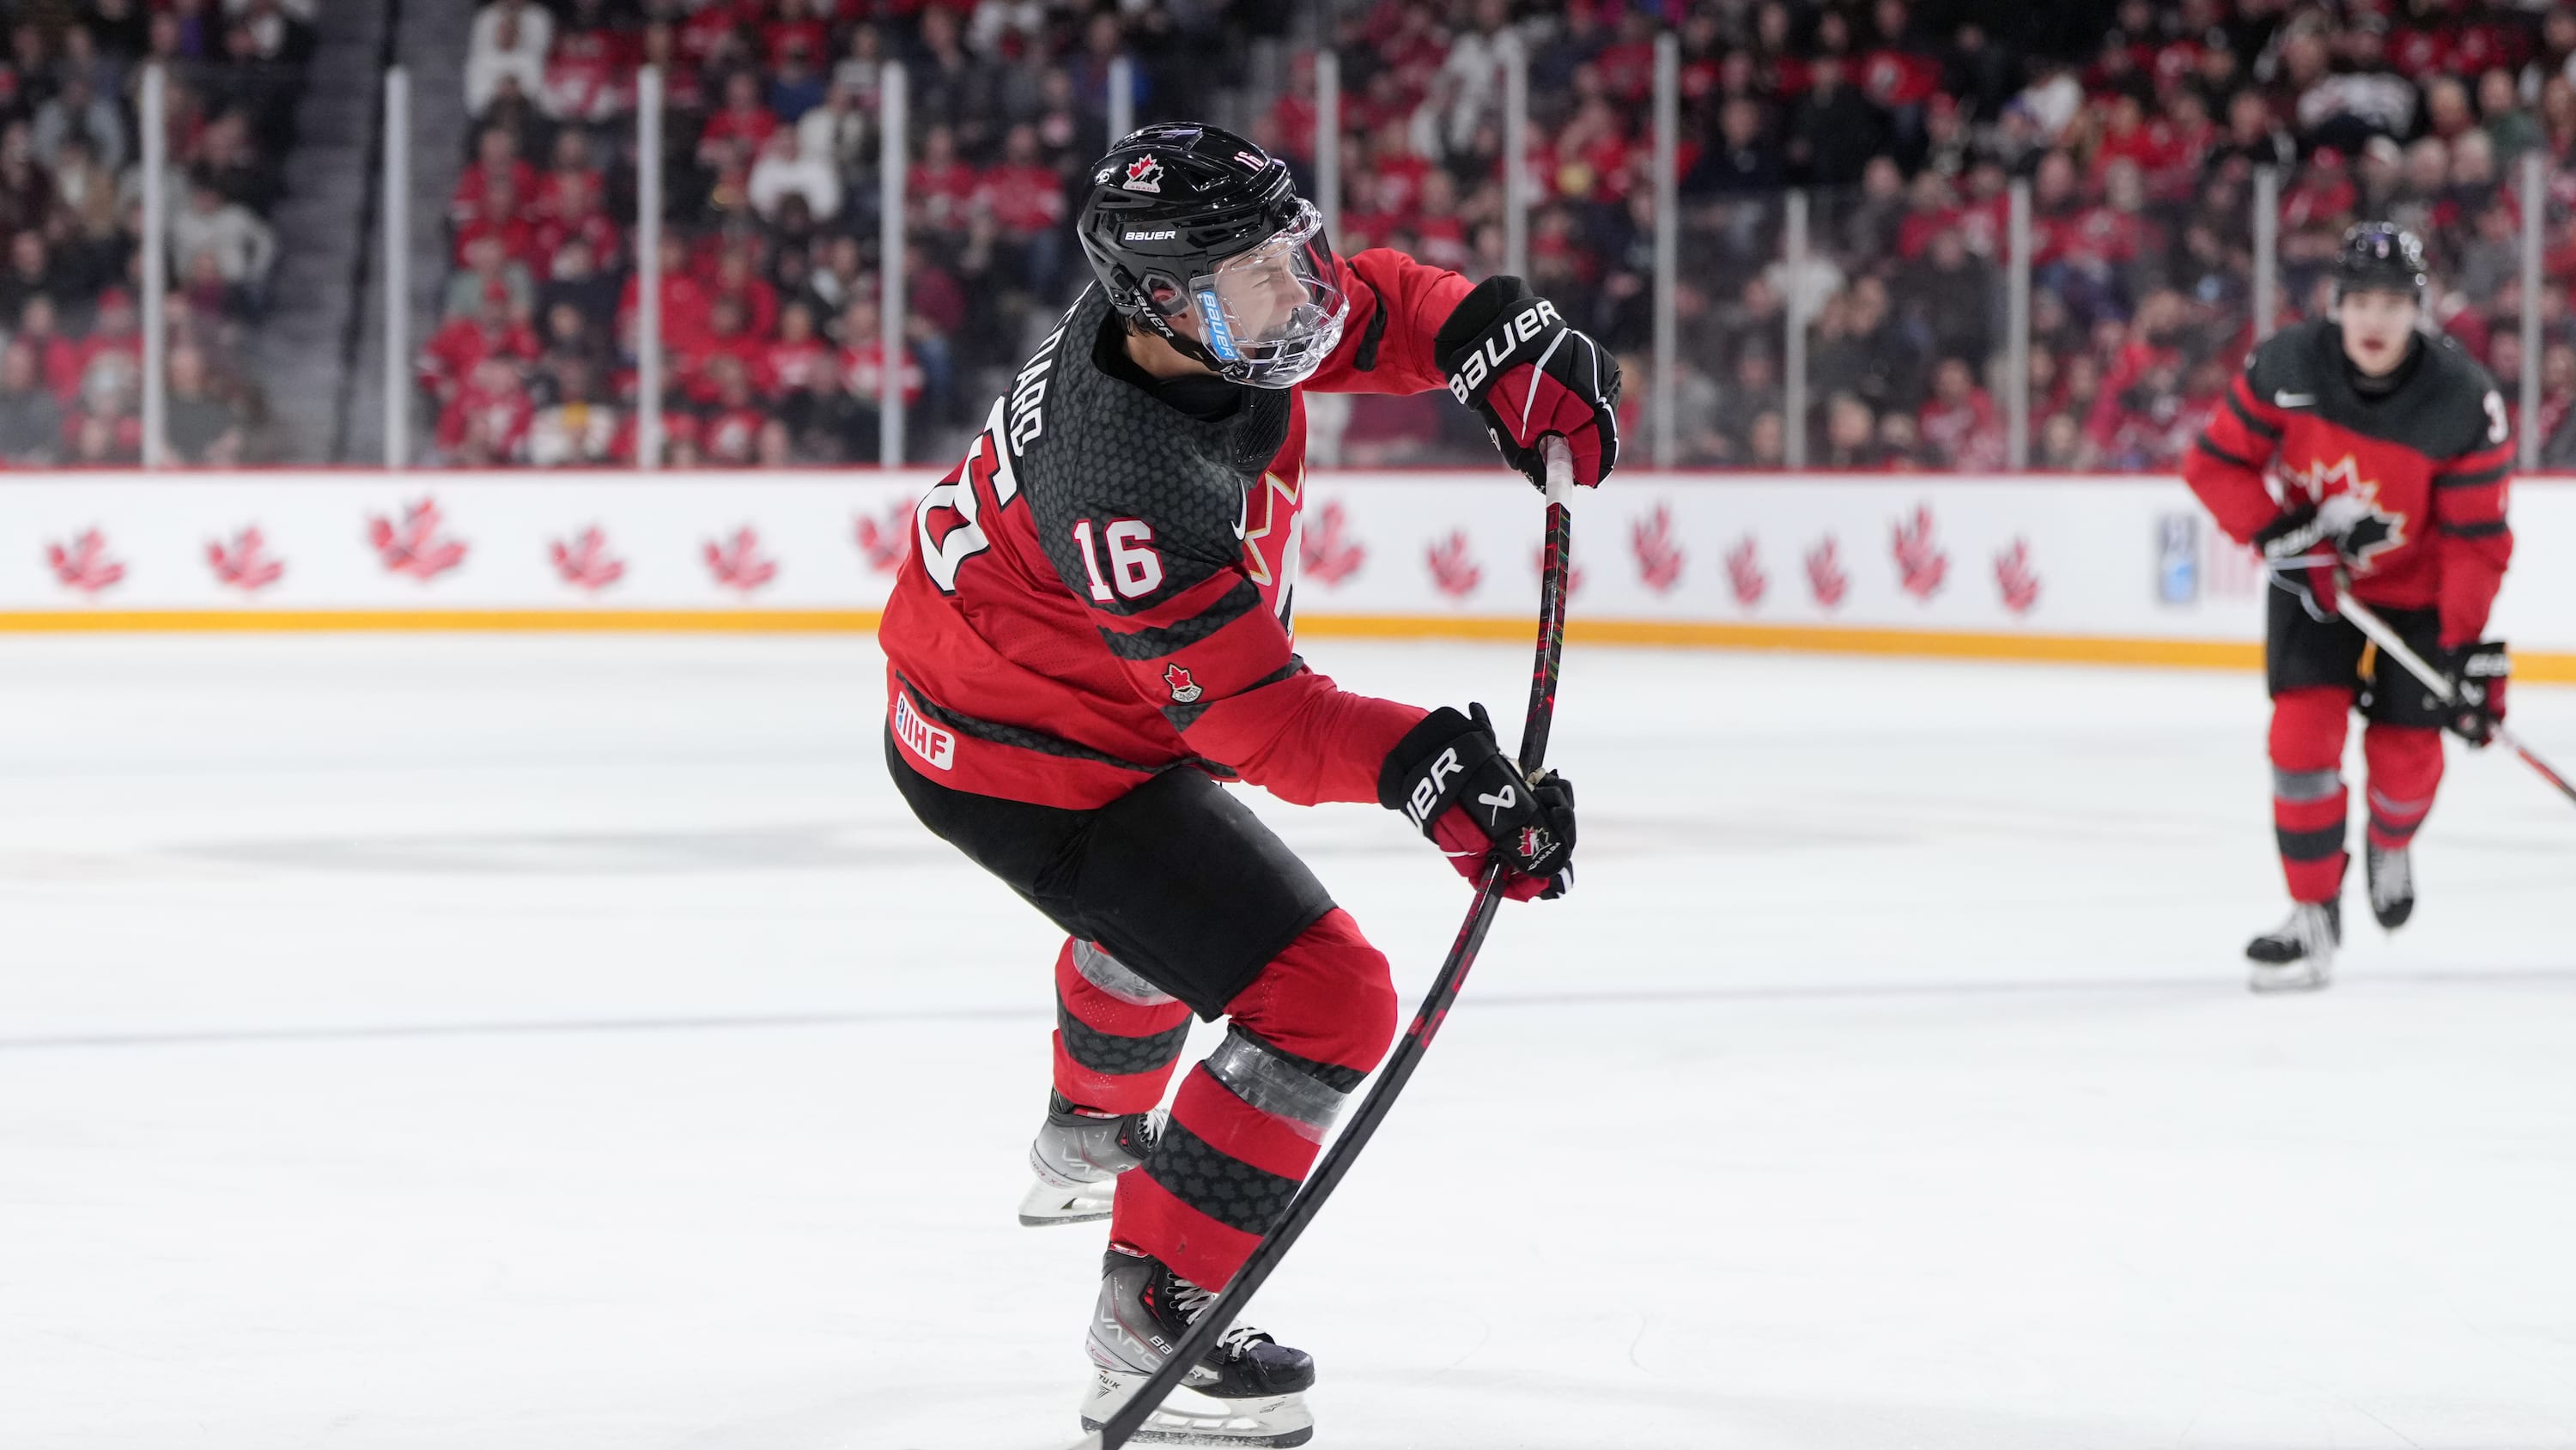 bedard shines as canada demolishes germany to bounce back at world juniors